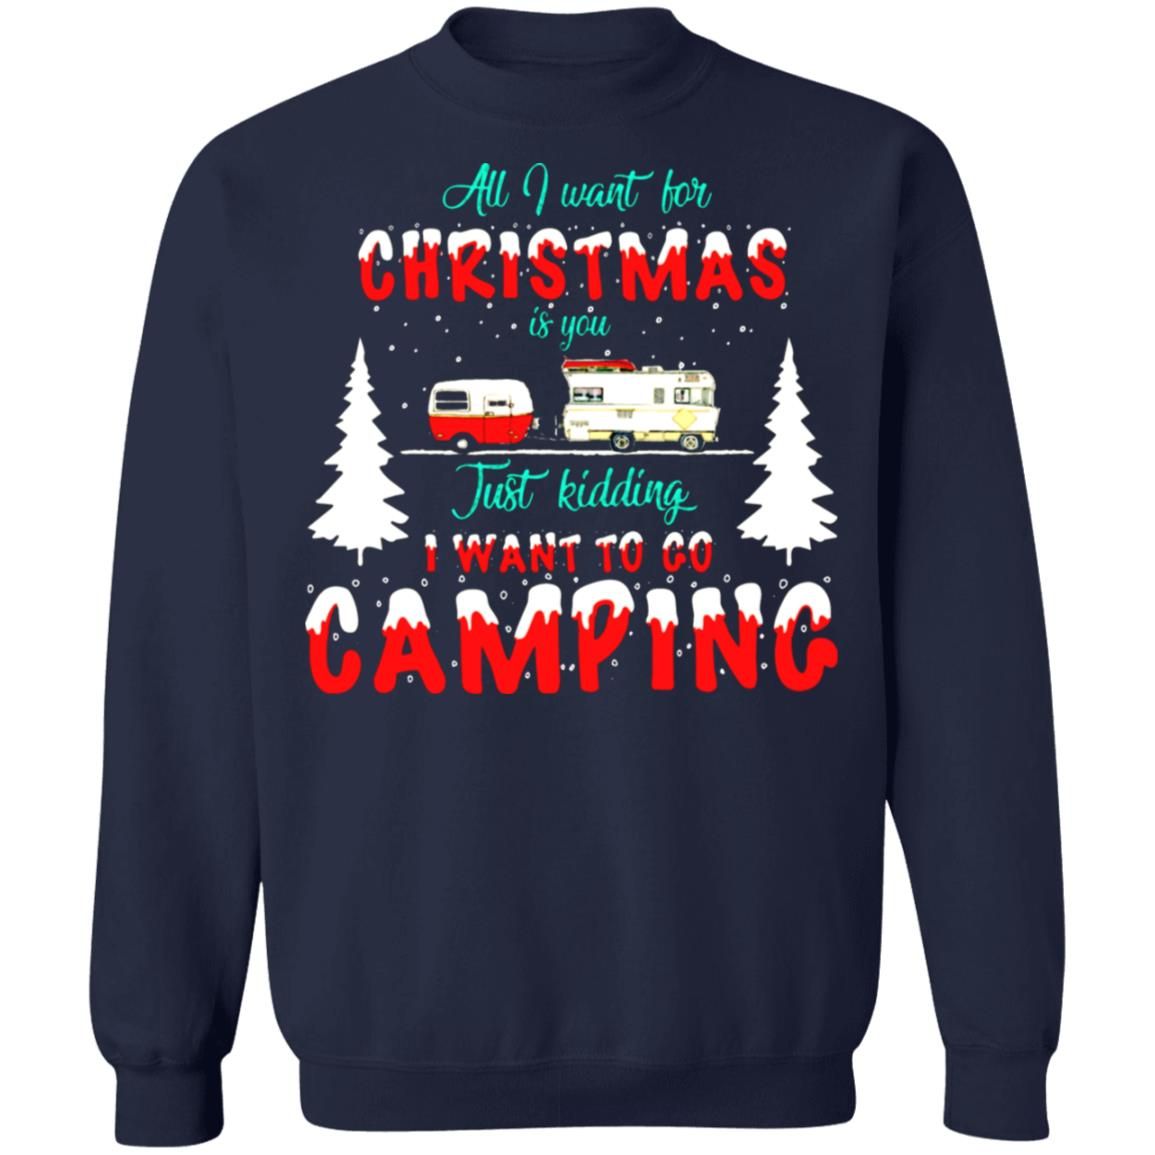 All I Want For Christmas Is You, Just Kidding I Want To Go Camping Christmas Sweatshirt Style: Sweatshirt, Color: Navy